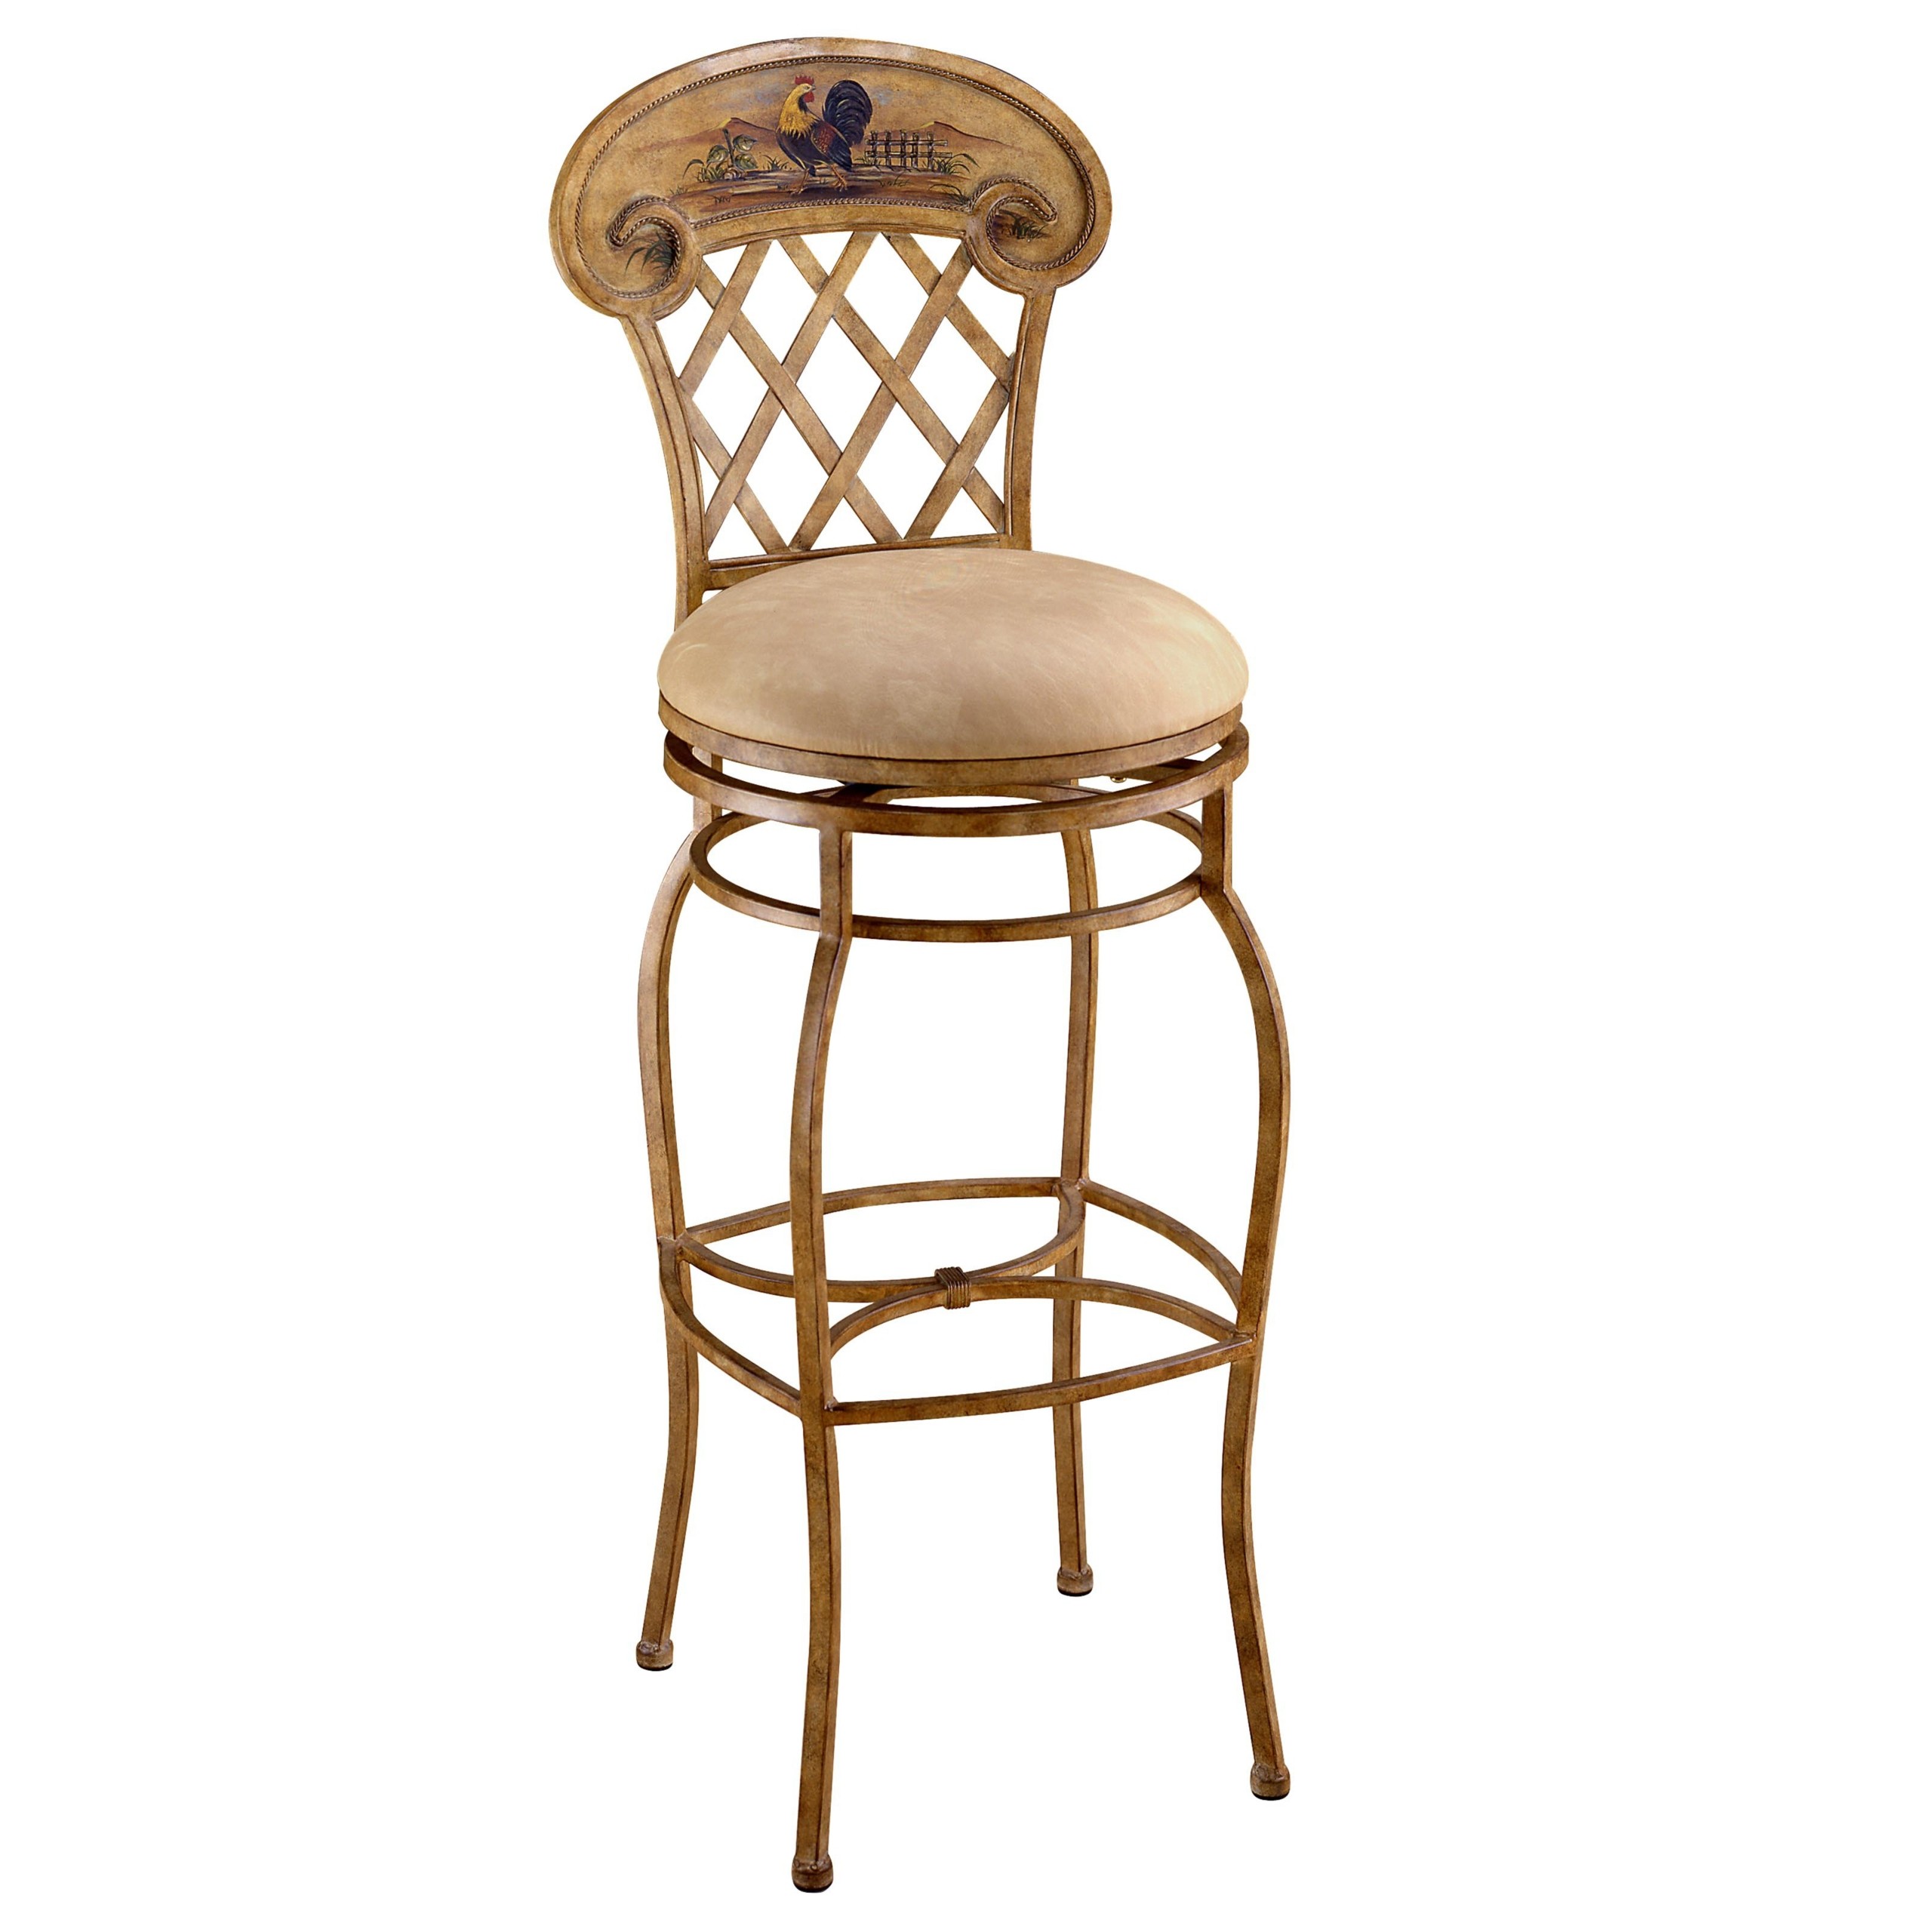 Hillsdale Rooster Hand-Painted 31 1/2" High Swivel Bar Stool